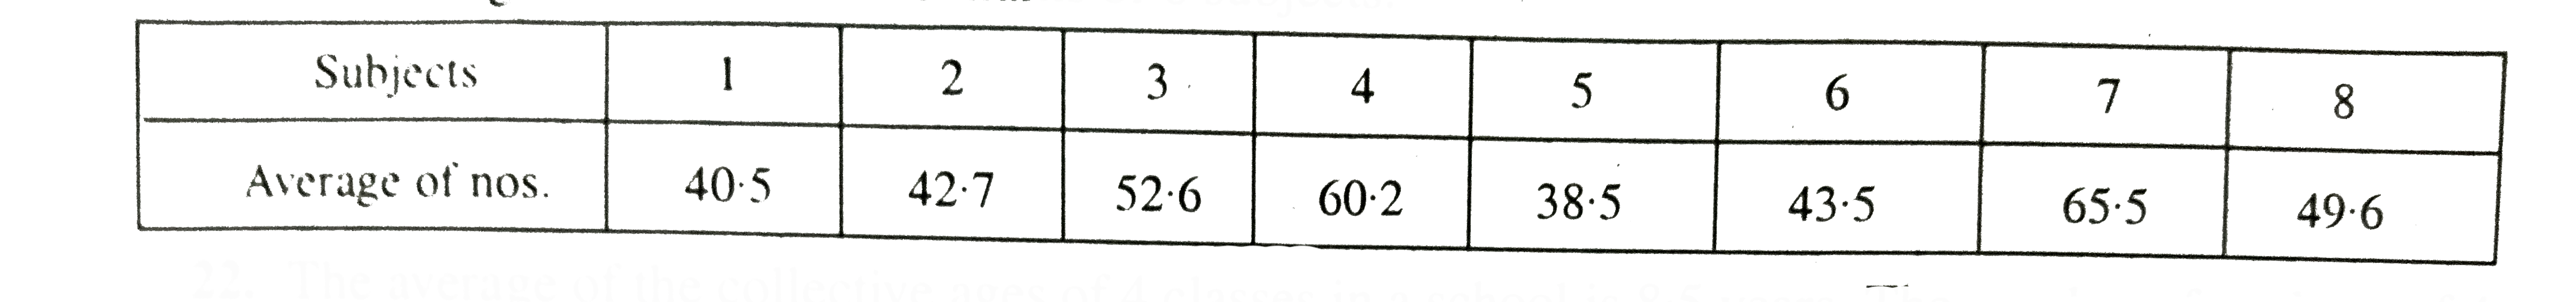 The arithmetic mean of the marks obtained in 8 different subjects in a school are given below. Find the average of the sum of the marks of 8 subjects.